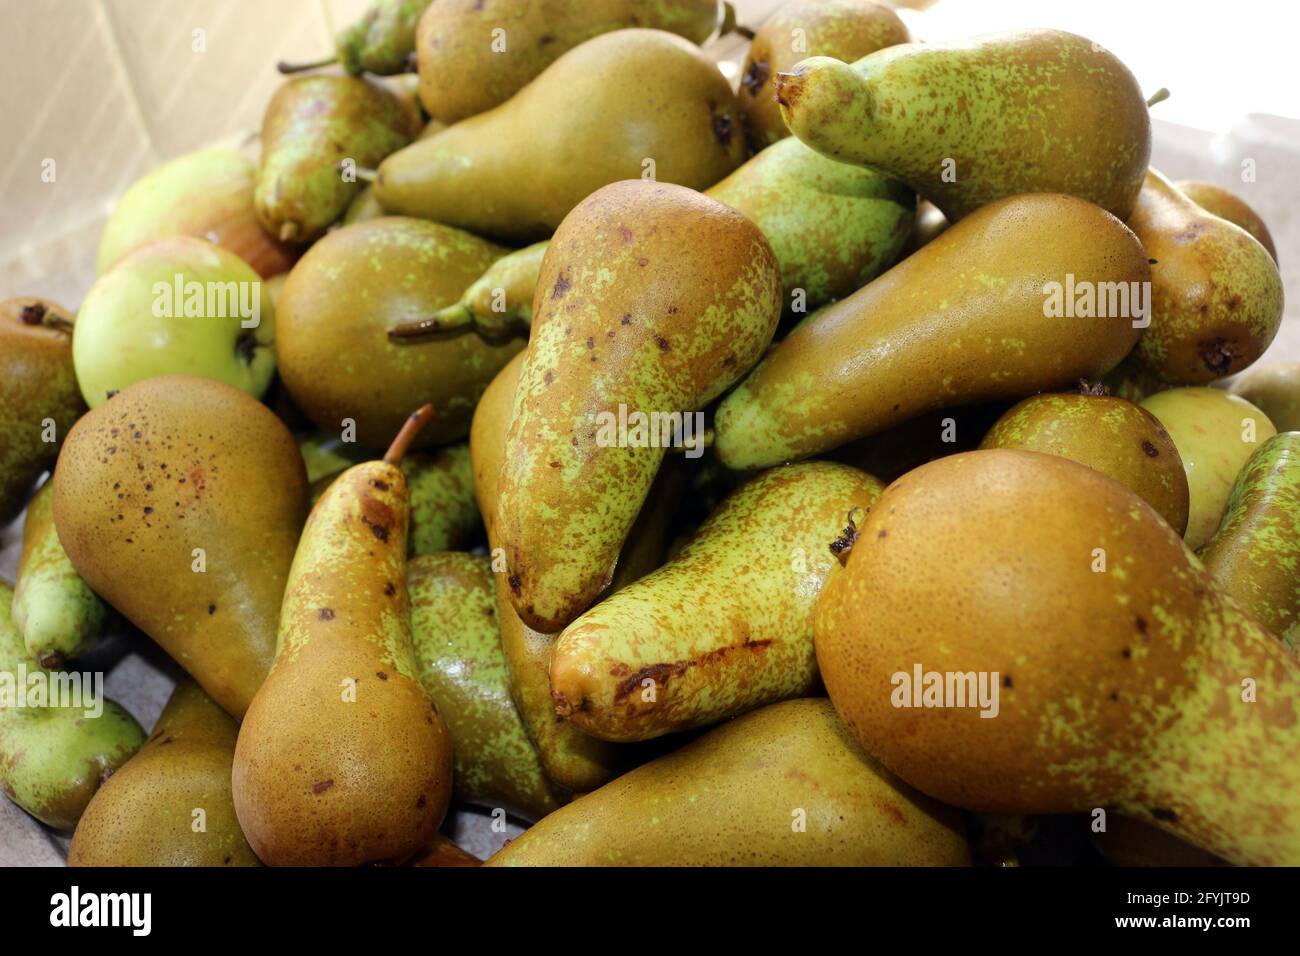 A pile of homegrown pears Stock Photo